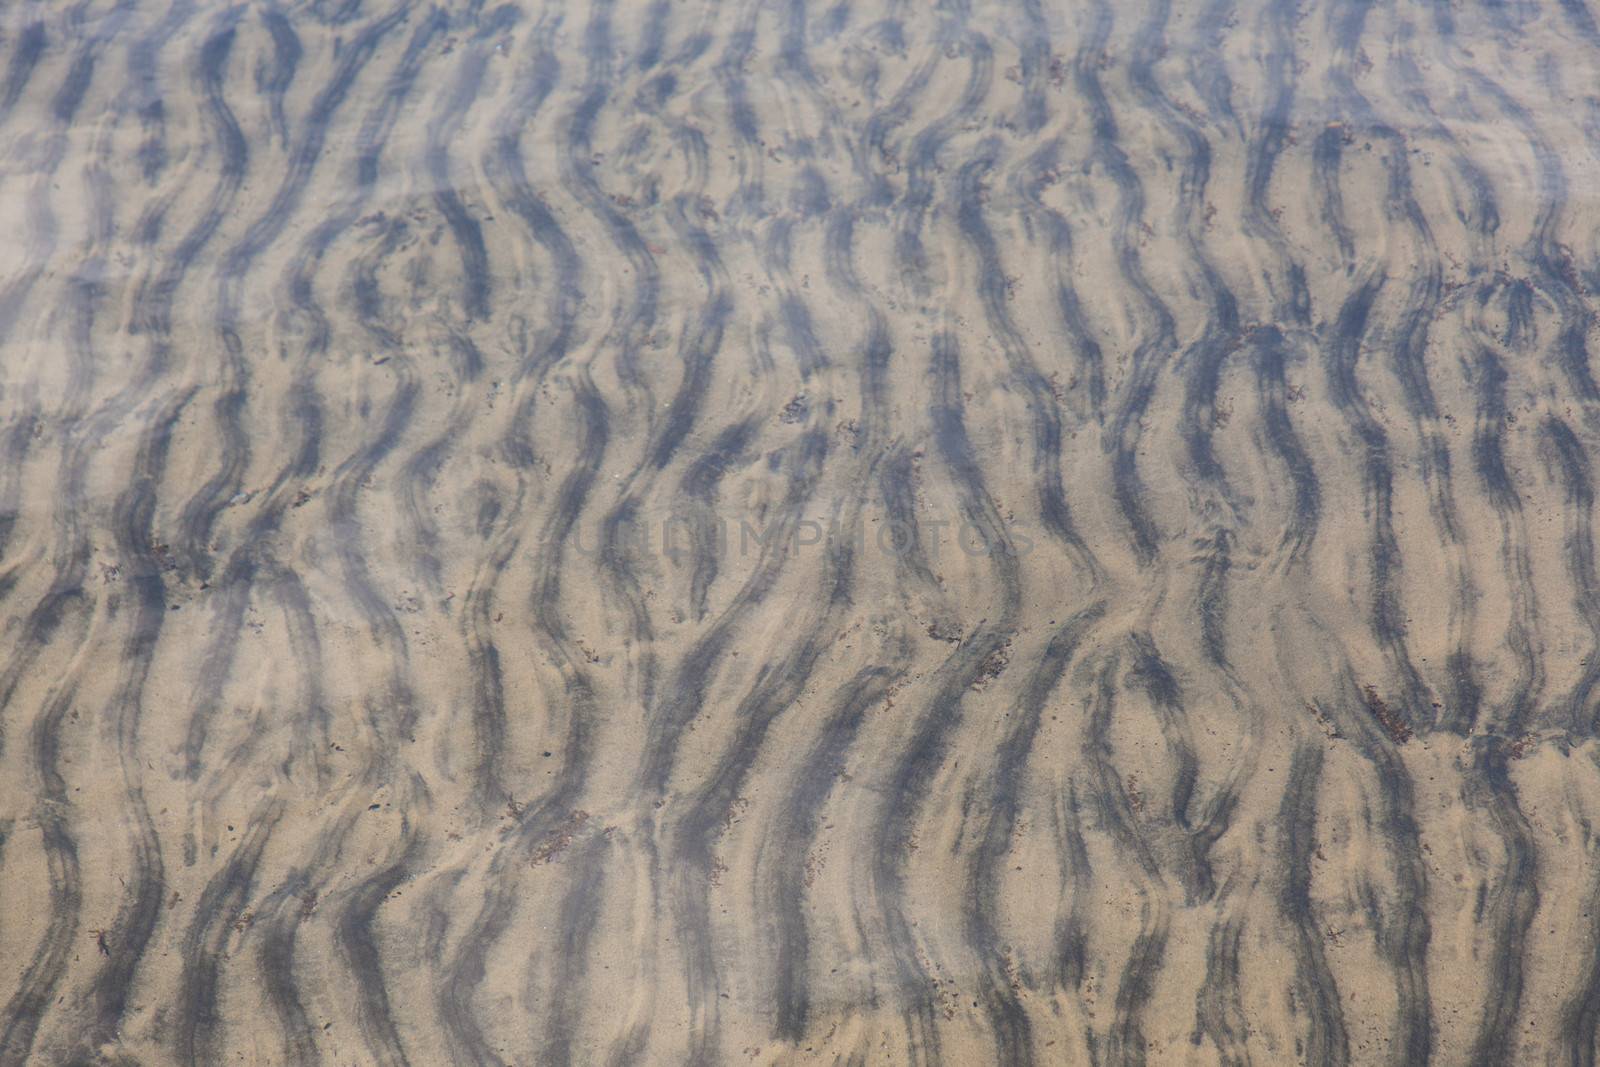 Rippled sand by melastmohican